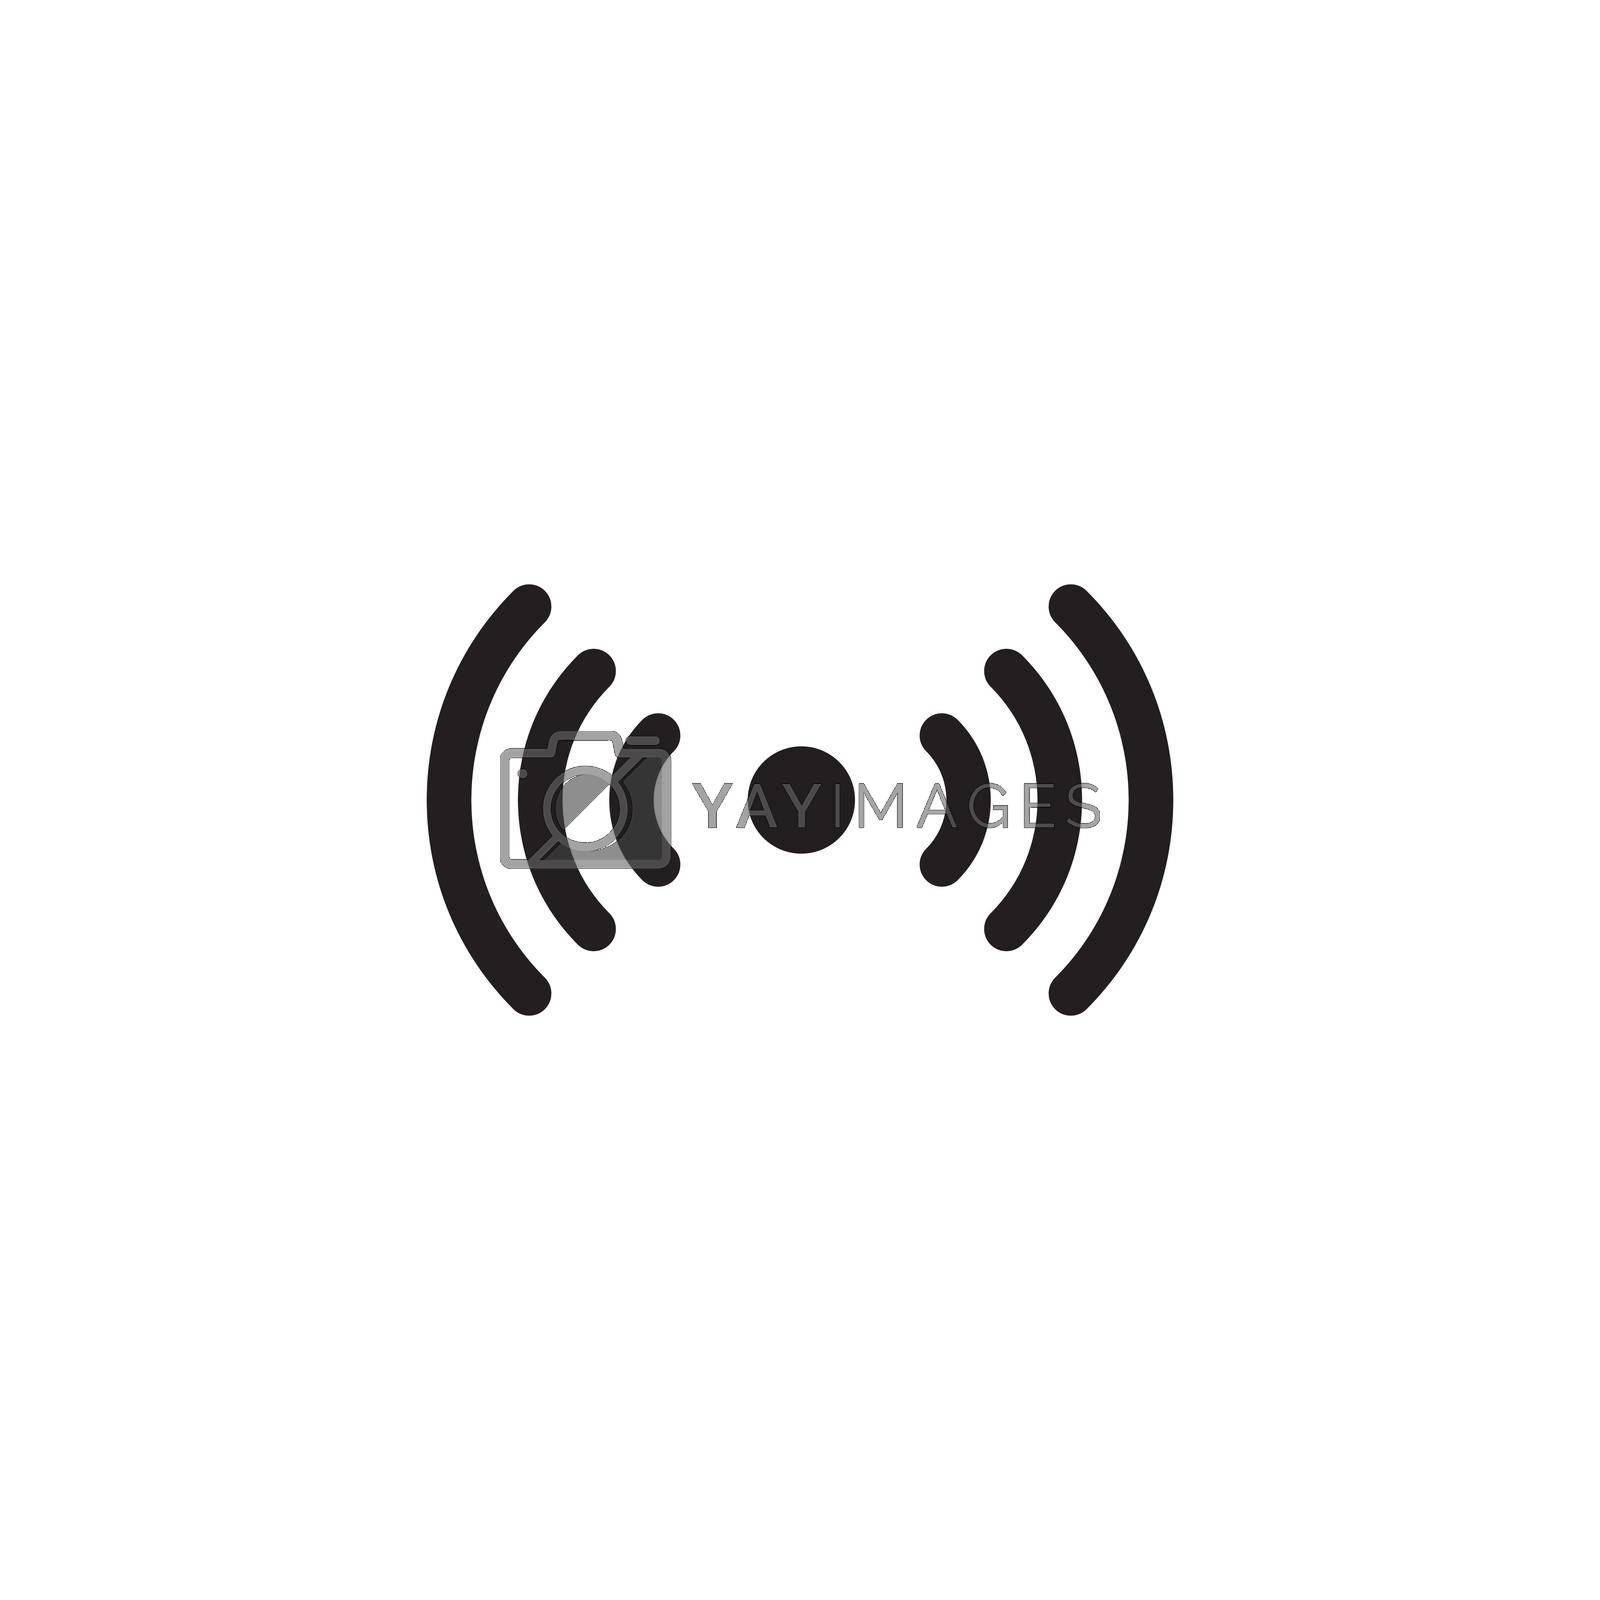 Royalty free image of wireless Logo Templat by awk